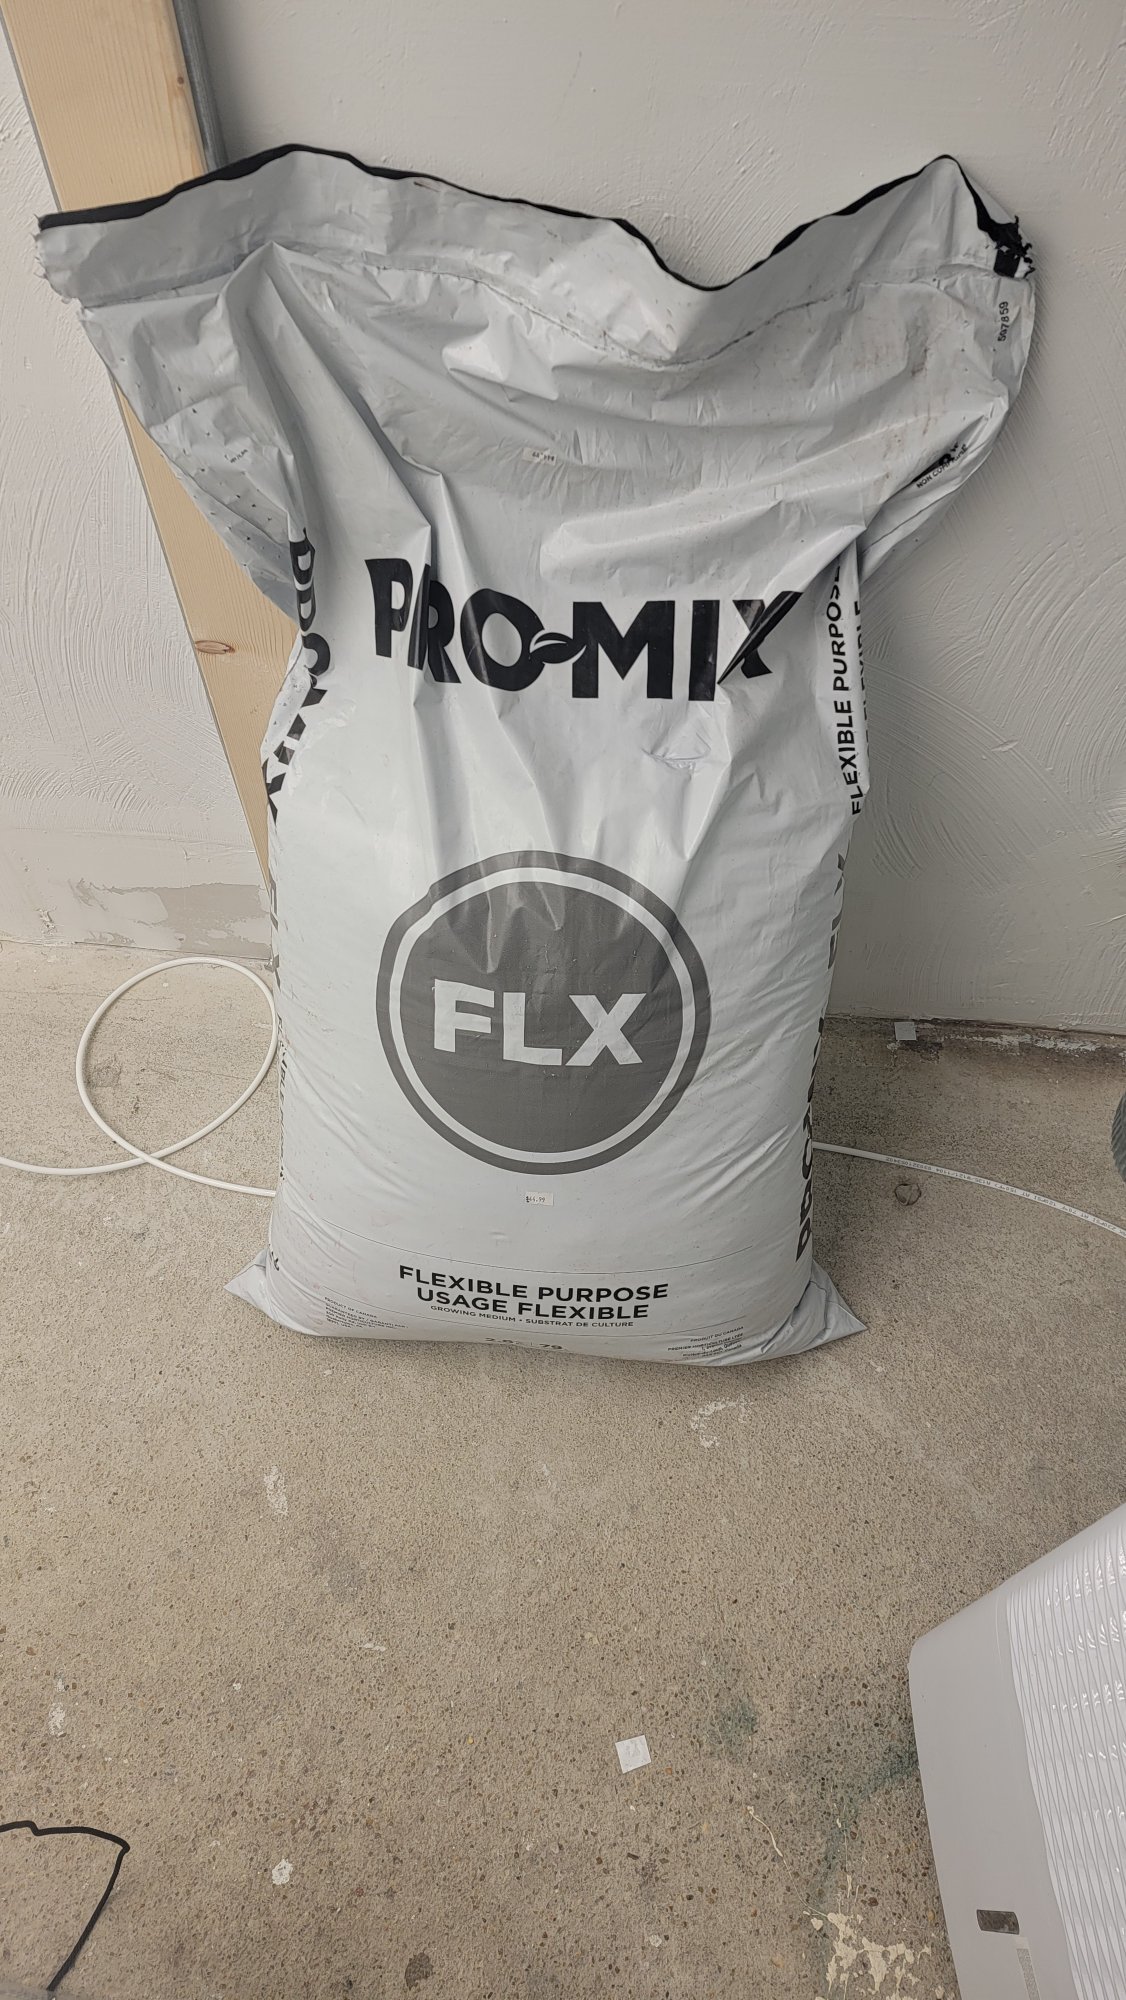 What to do with promix flx